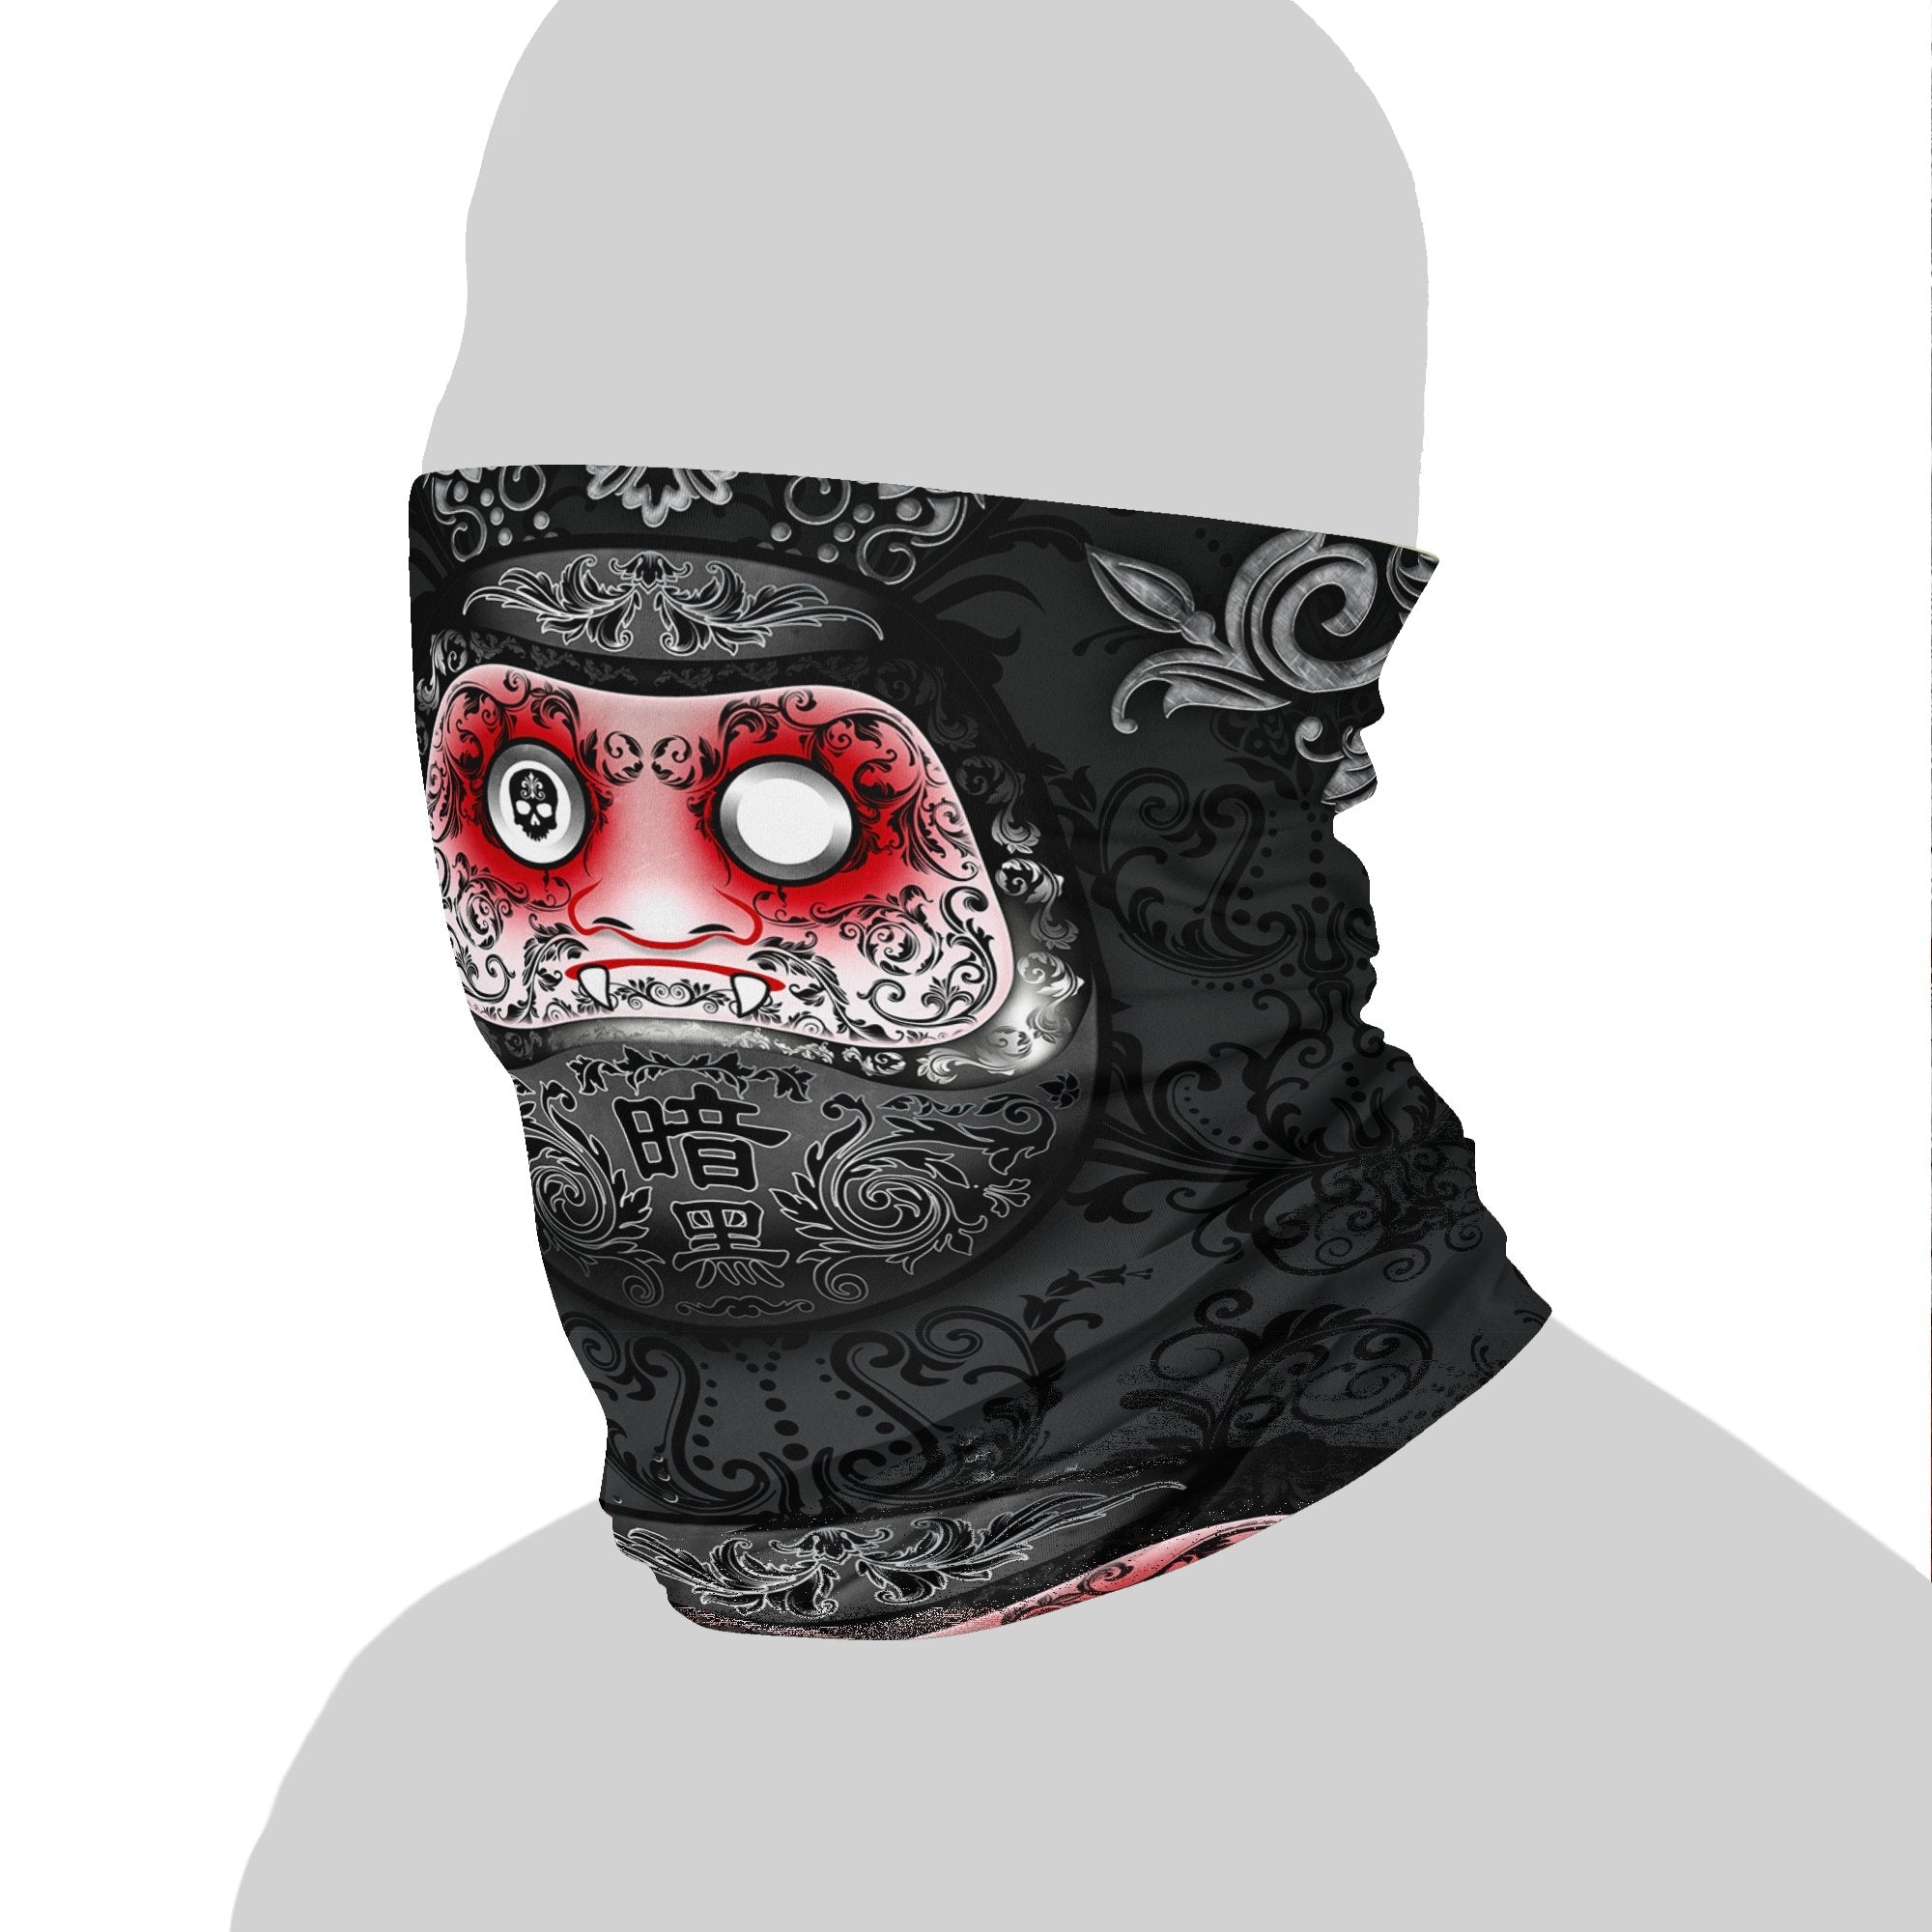 Japanese Neck Gaiter, Face Mask, Head Covering, Daruma, Funny Anime Style Outfit - Gothic - Abysm Internal